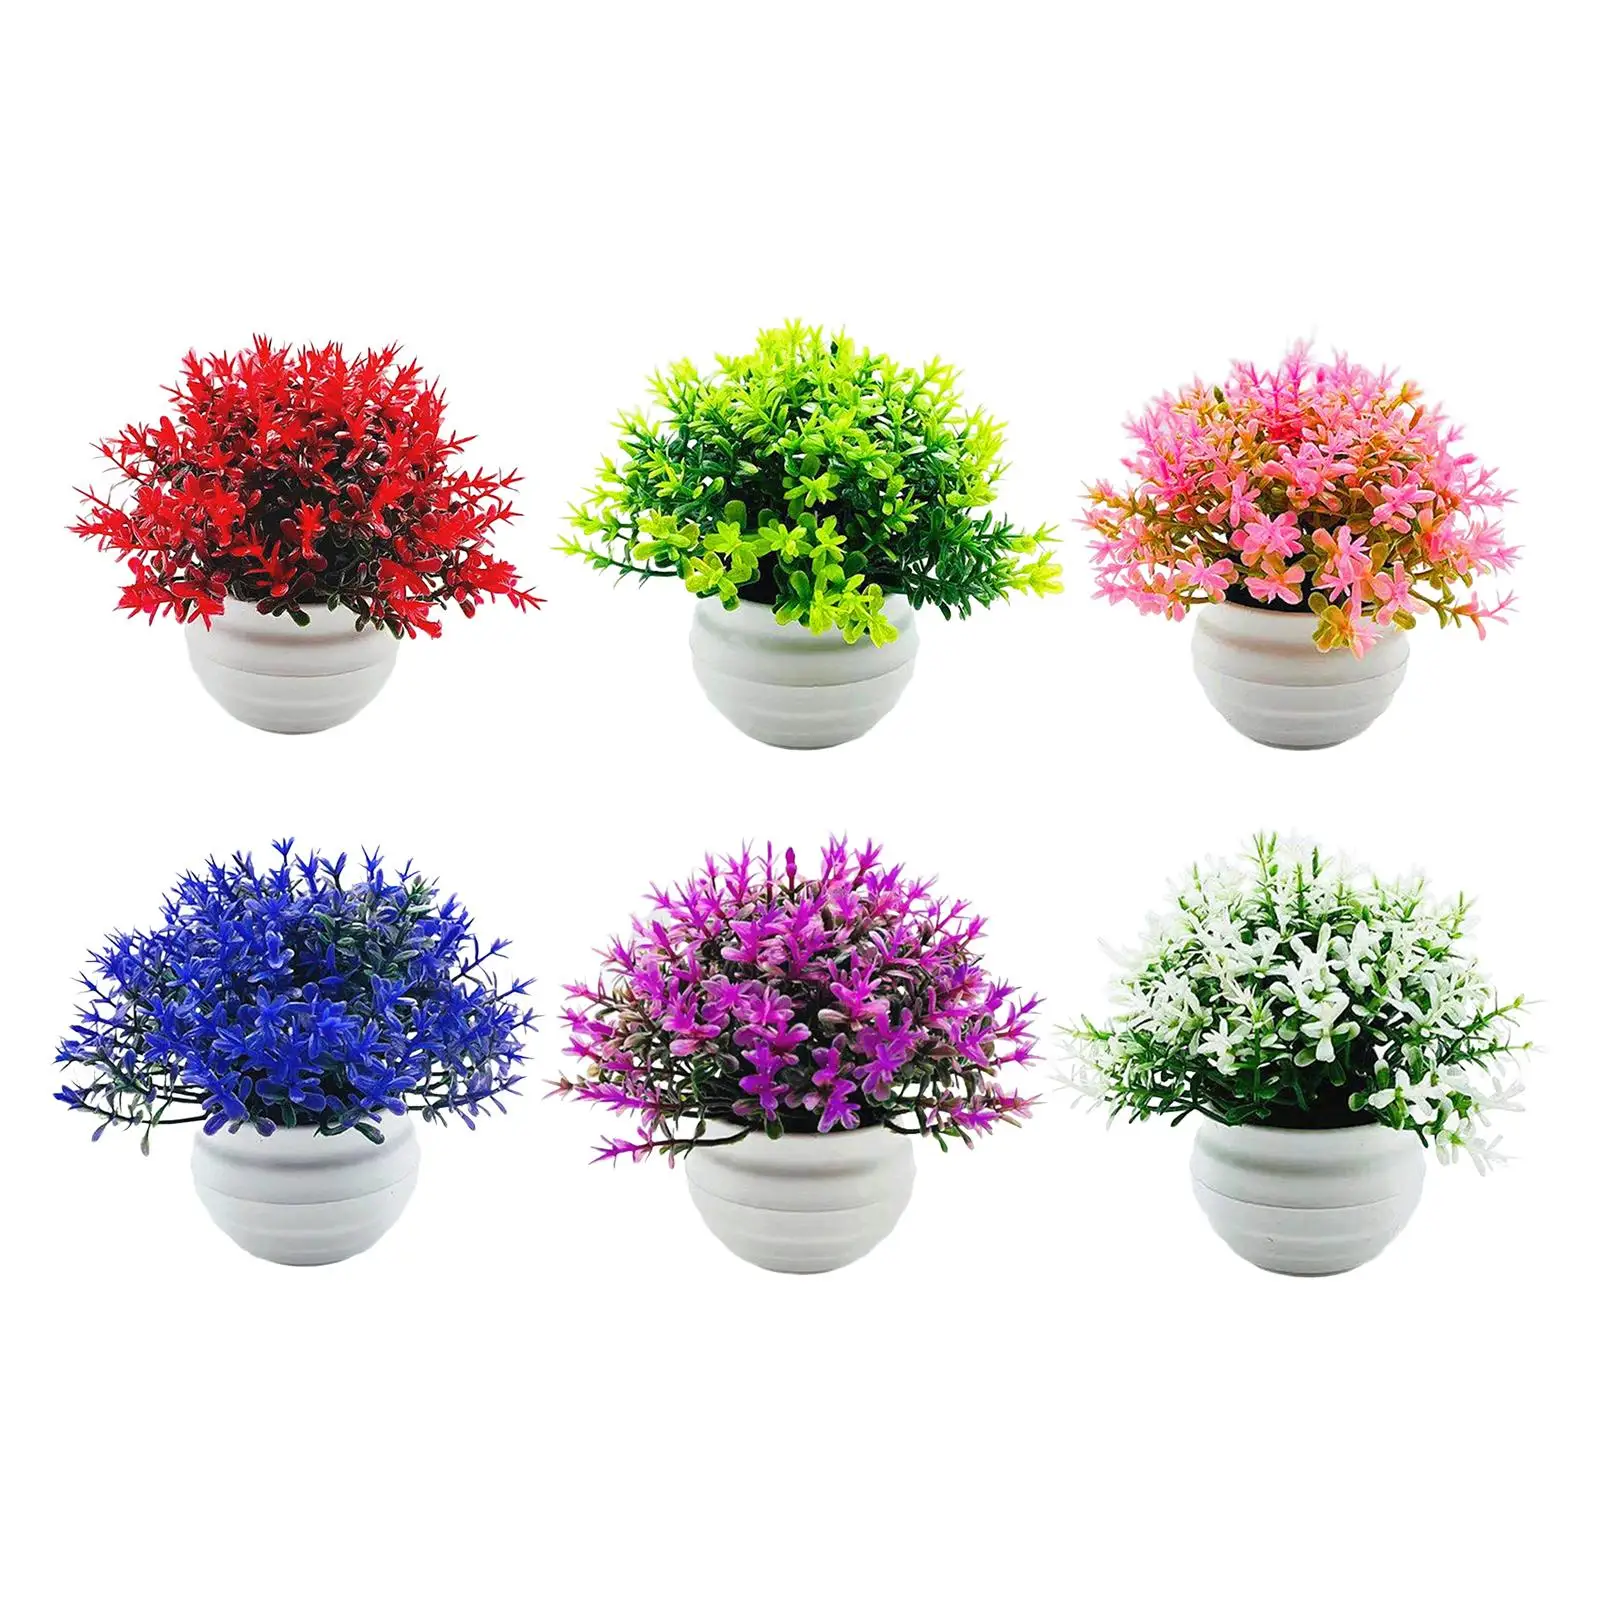 Fake Flower Potted Ornament Plant Craft Decoration Artificial Bonsai Decor for Home Decor Yard Wall Shelf Office Bedroom